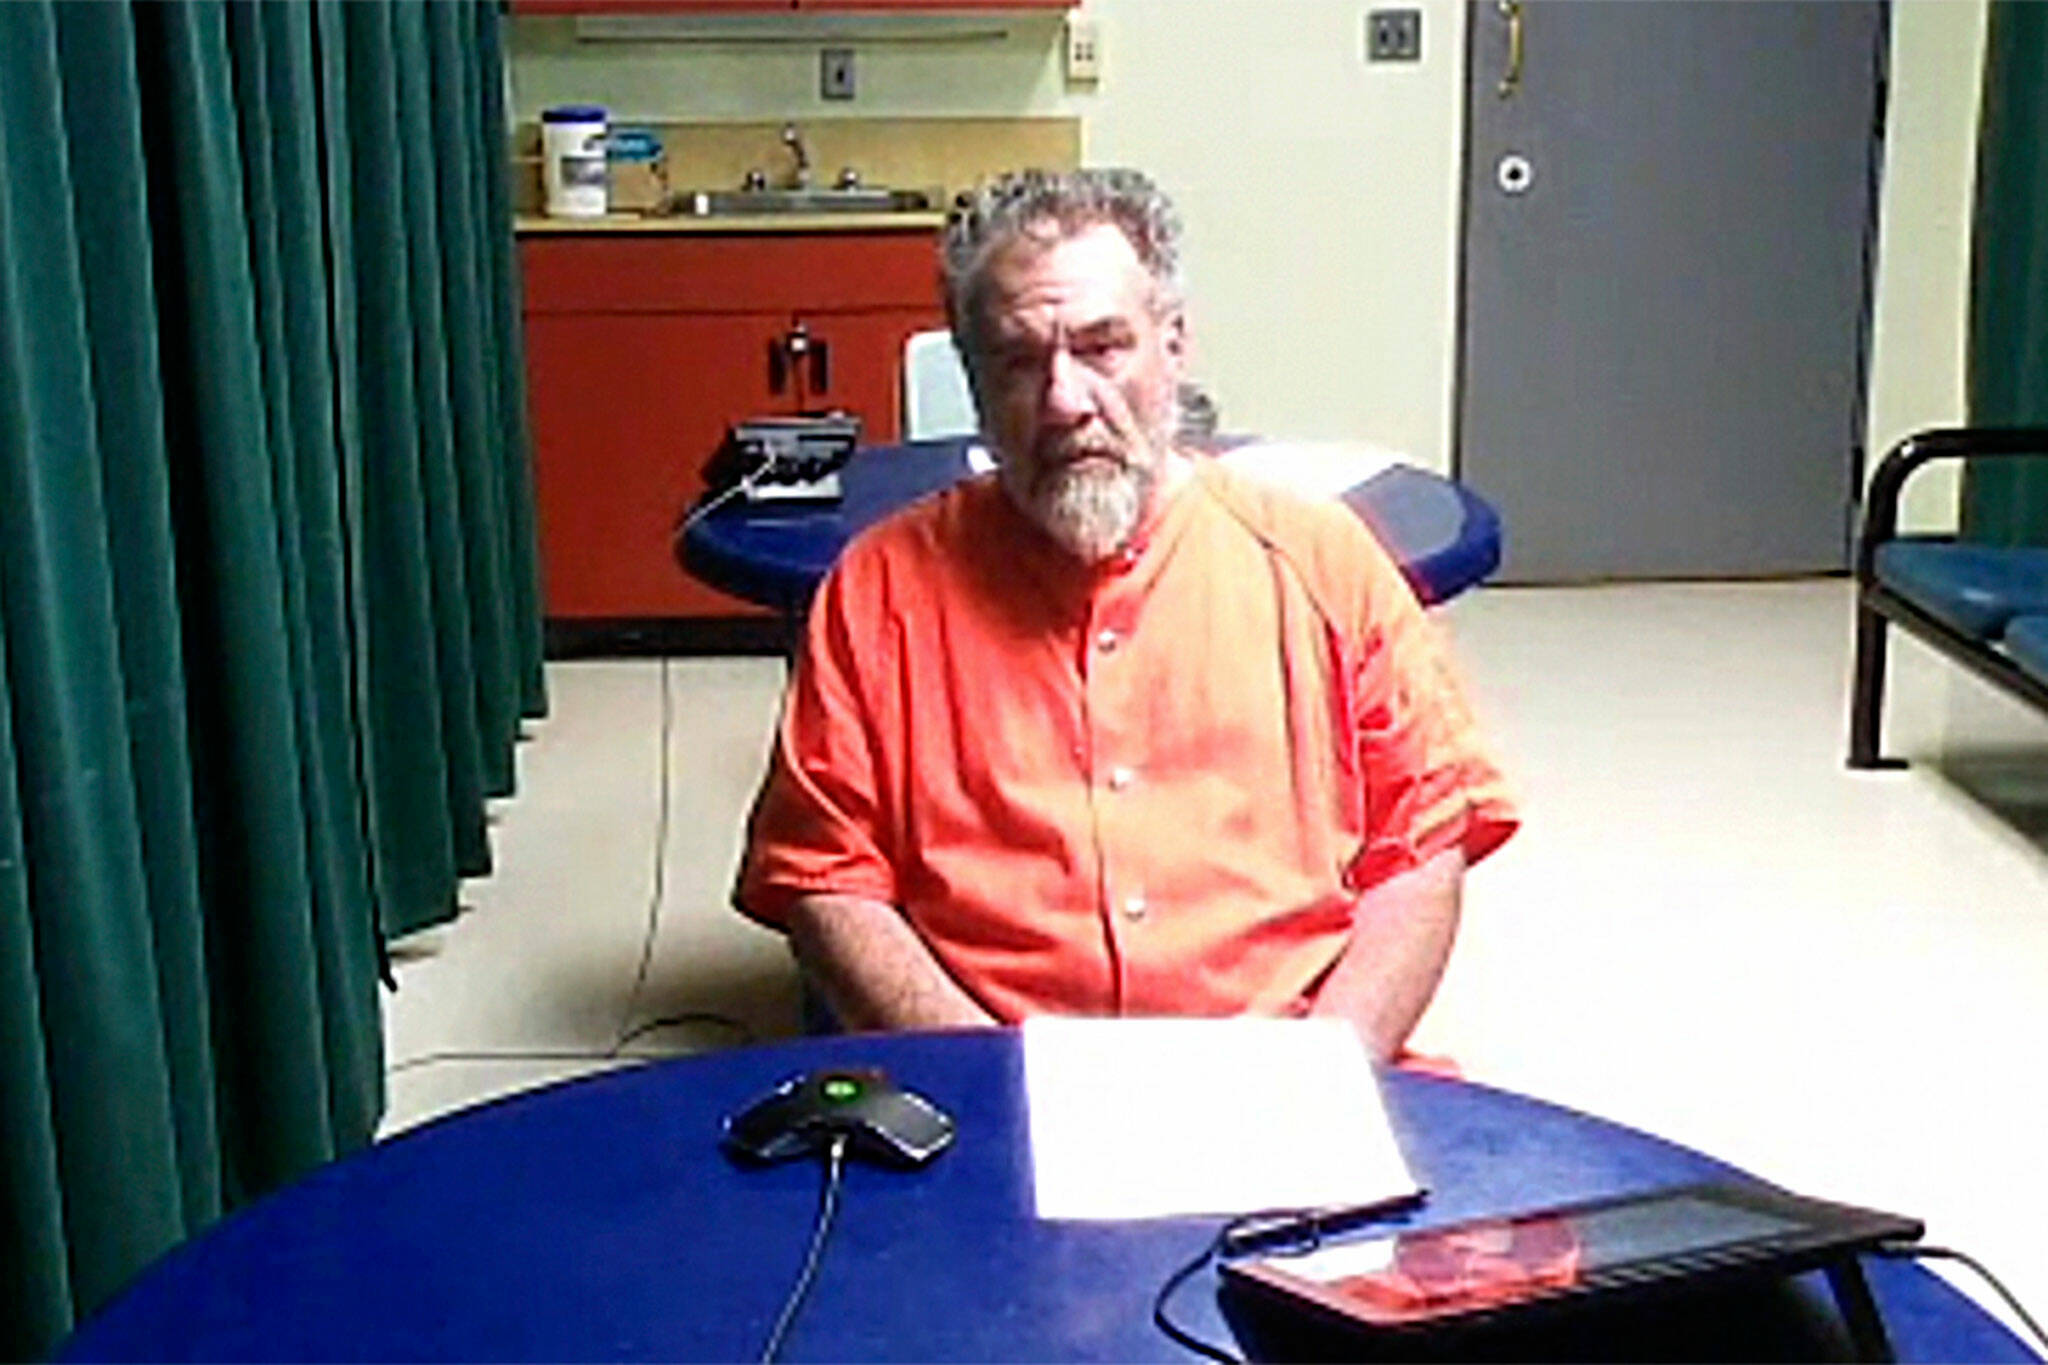 Photo screen capture/ John Fitzgerald Barcellos, 59, of Sequim appears in Clallam County Superior Court on Sept. 20 where he was charged with 10 felonies including three counts of assault in the second degree with a deadly weapon, four counts of harassment with threats to kill, and assault in the third degree of a law enforcement officer.